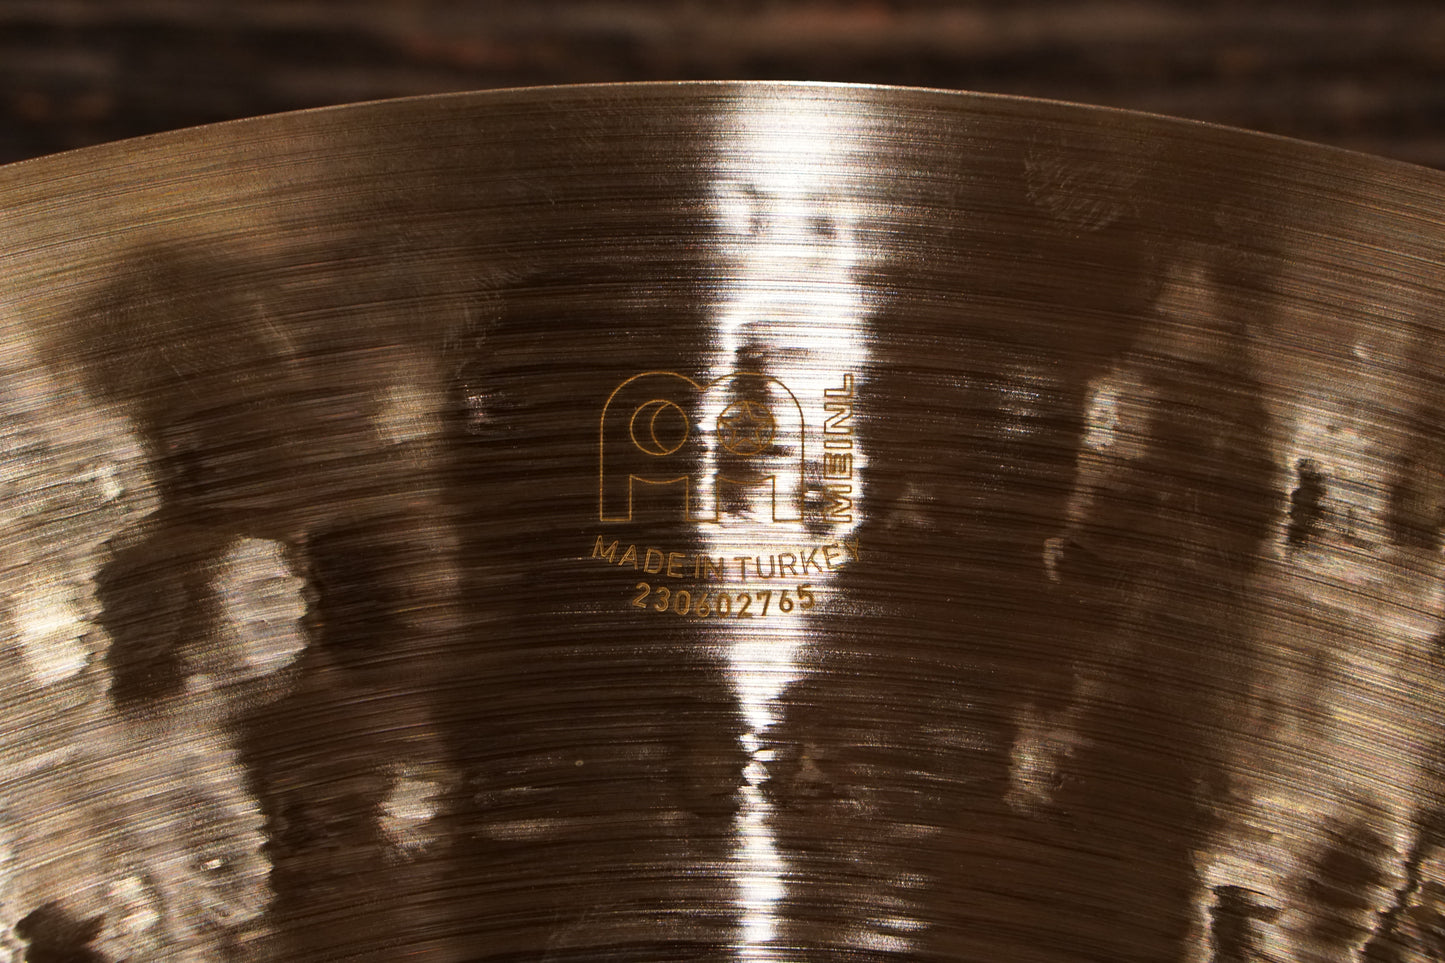 Meinl 22" Byzance Foundry Reserve Ride Cymbal - 2620g